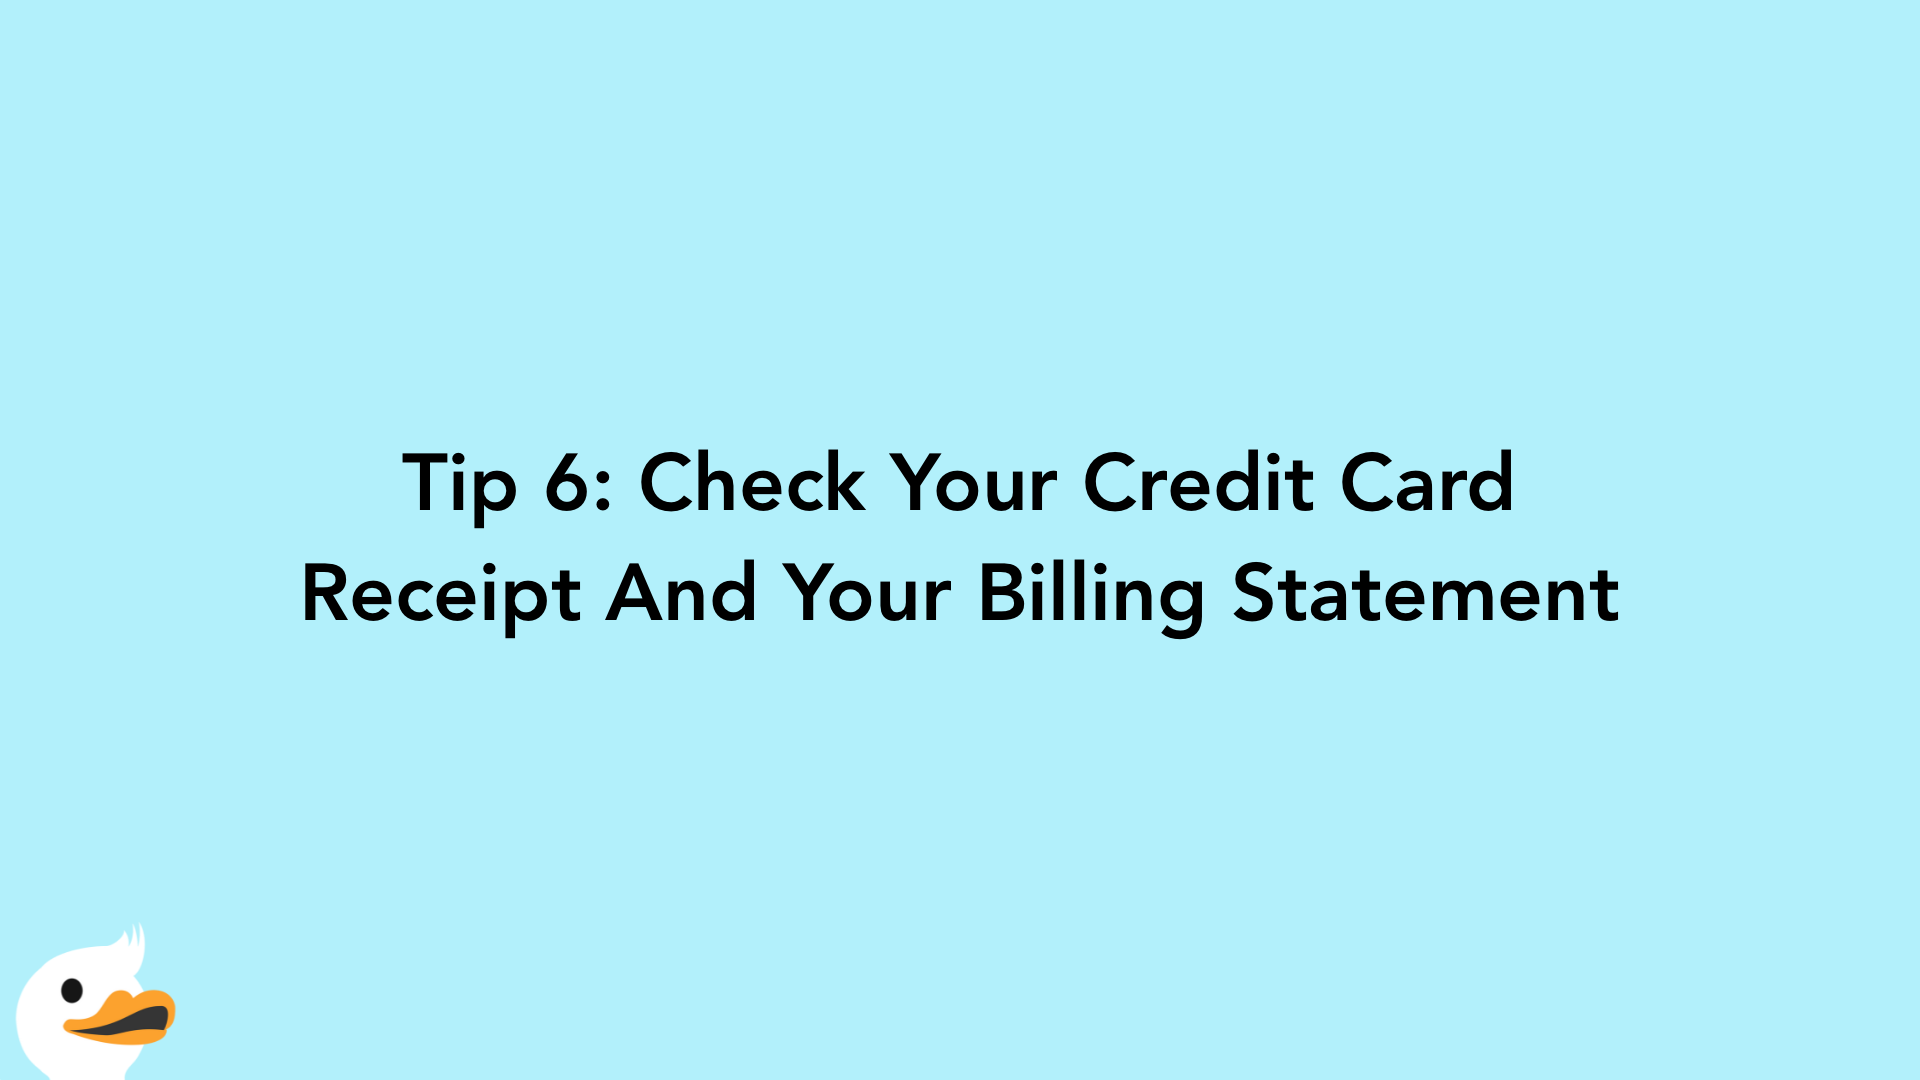 Tip 6: Check Your Credit Card Receipt And Your Billing Statement